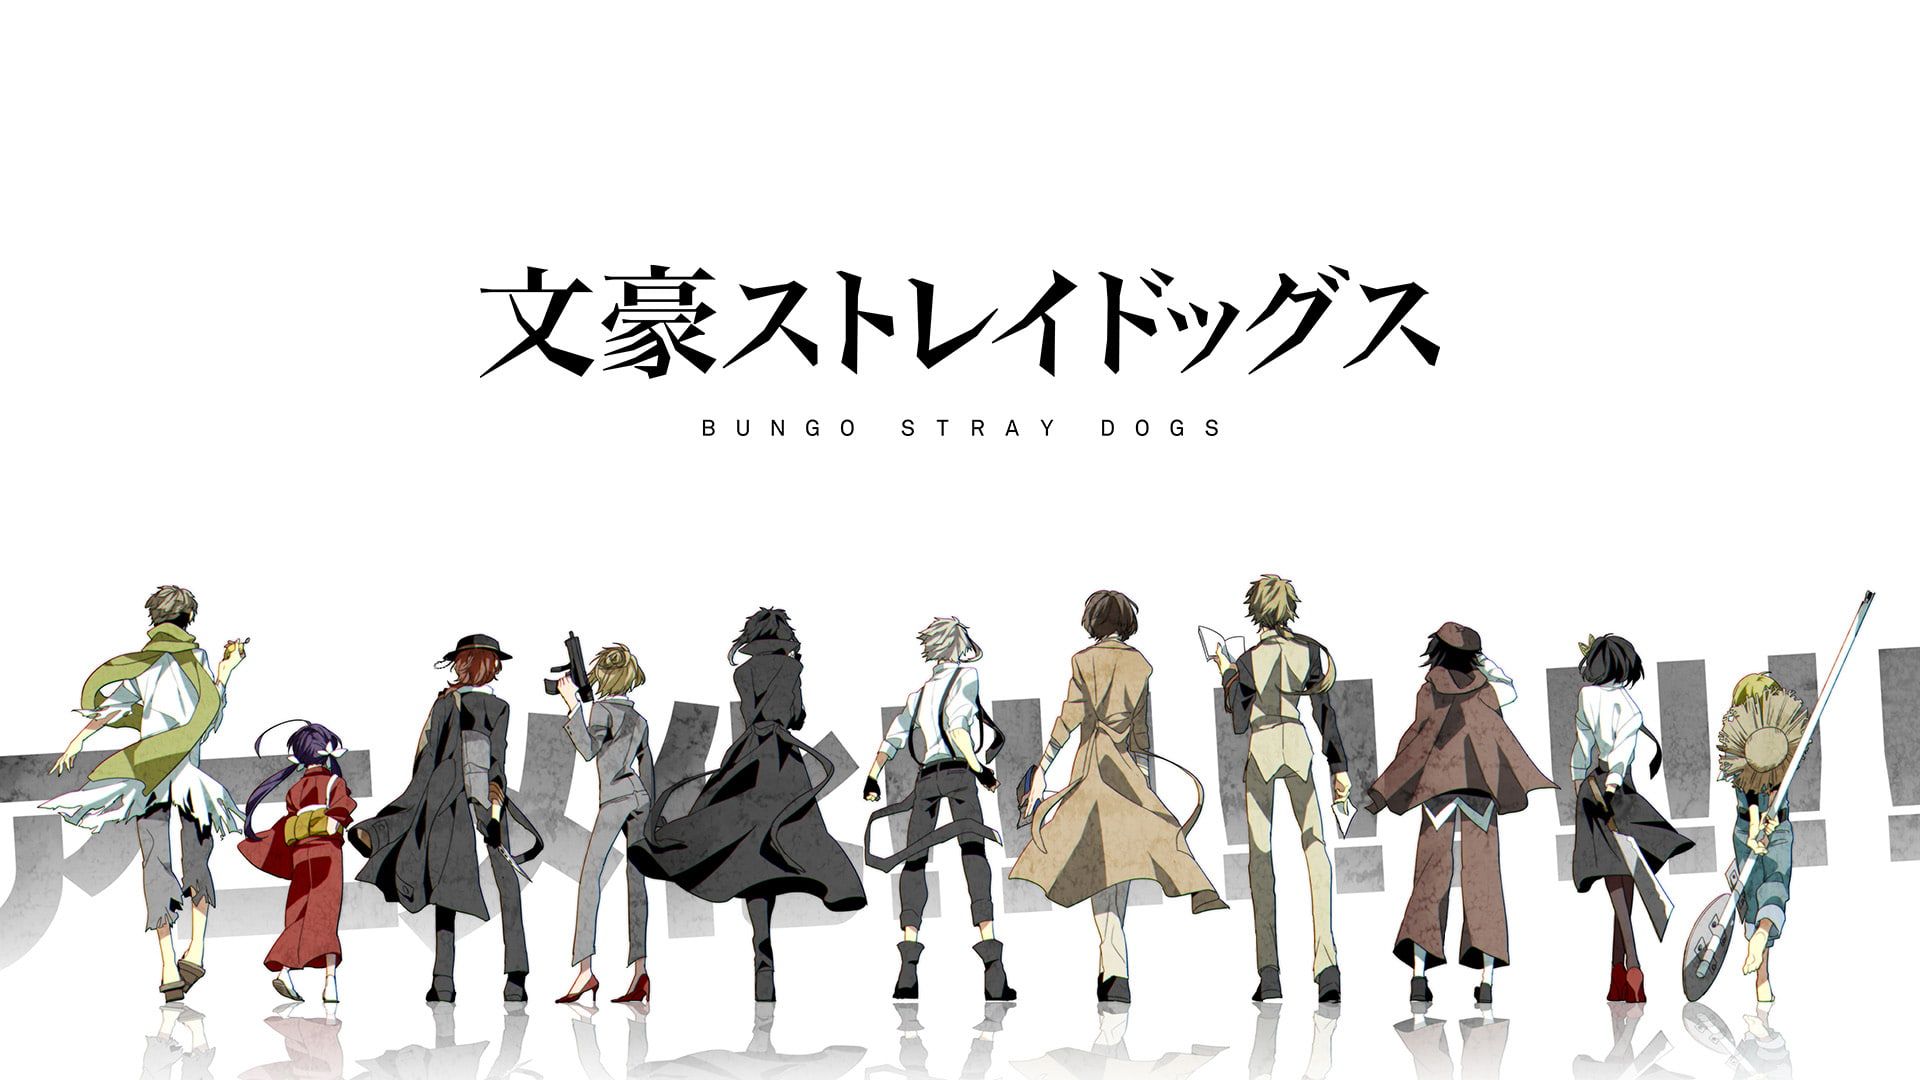 Bungou Stray Dogs Hd Wallpapers